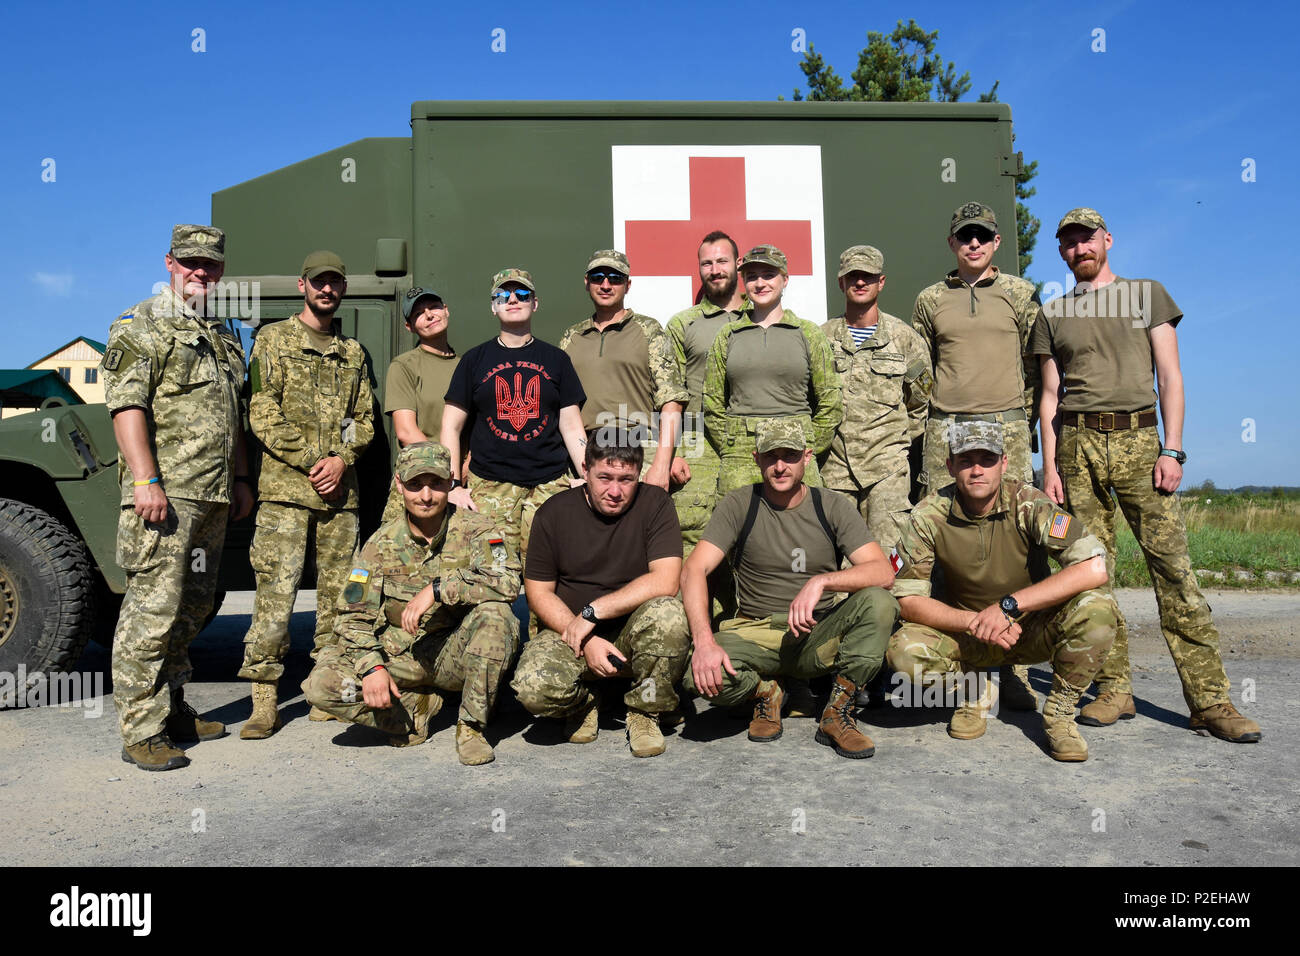 Ukrainian Soldiers pose for a group photo after the first day of learning how to drive the new field litter ambulances at Yavoriv Training Area, Ukraine on Sep 8, 2016. A team of medics and a mechanic from 557th Medical Company (Area Support) and 212th CSH are working together to conduct field littler ambulance and medical equipment set familiarization with the Ukrainian military from Sep 5 to 16, 2016. (U.S. Army photo by Capt. Jeku Arce, 30th Medical Brigade Public Affairs) Stock Photo